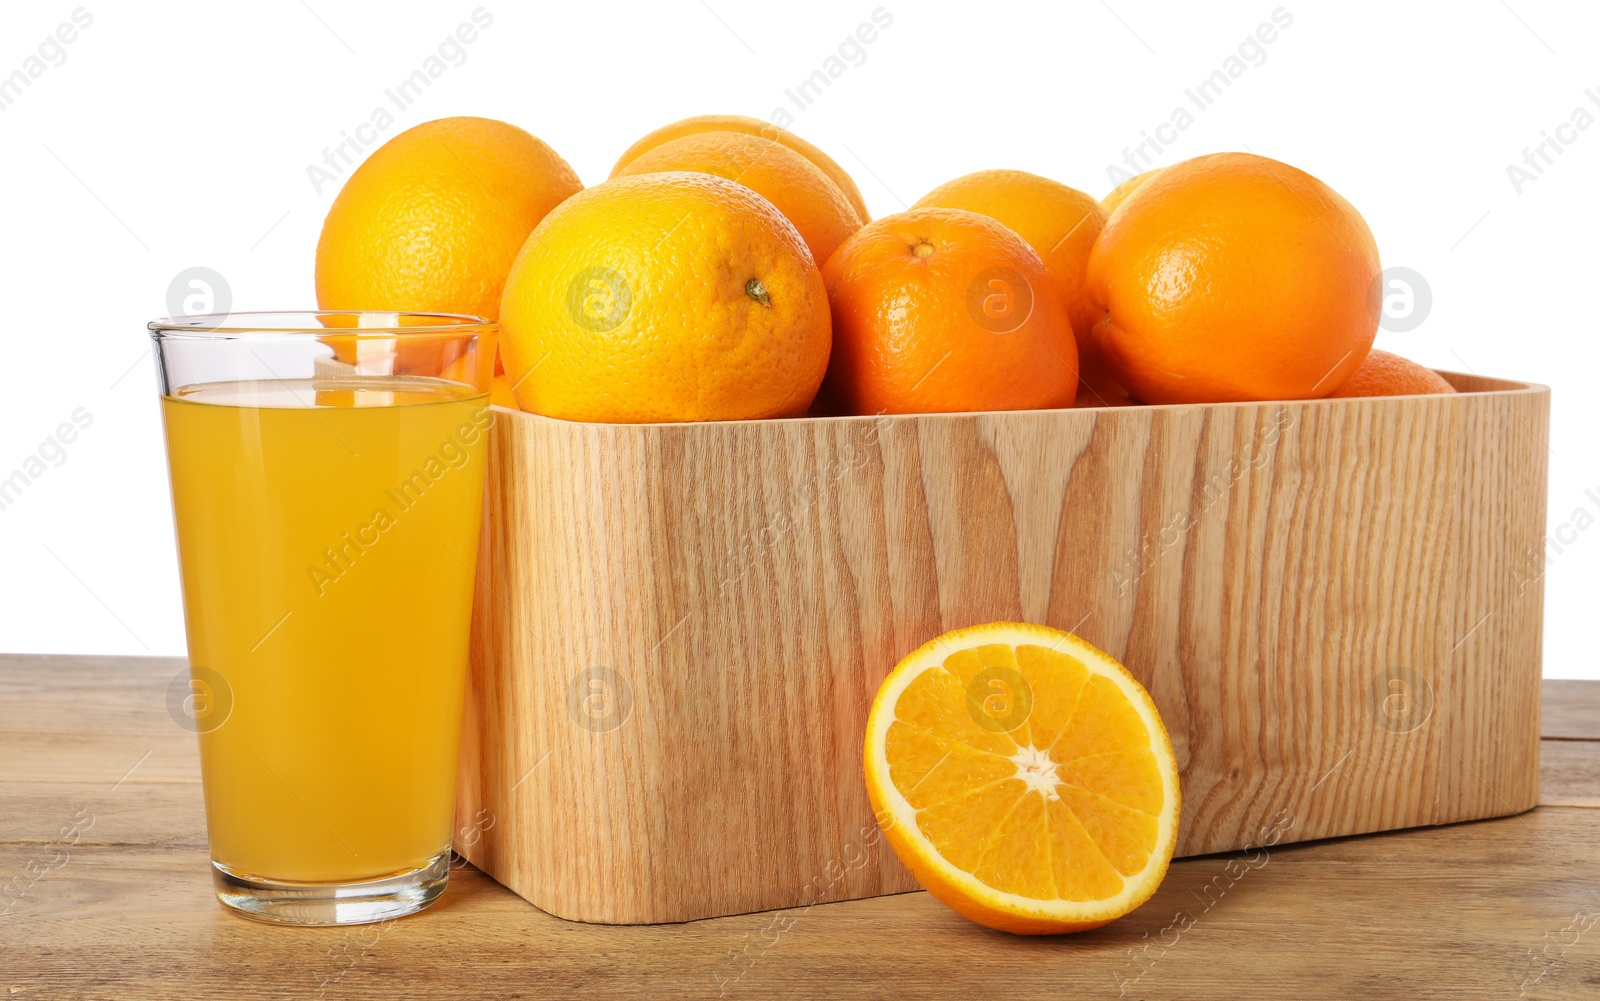 Photo of Fresh oranges in crate and glass of juice on wooden table against white background